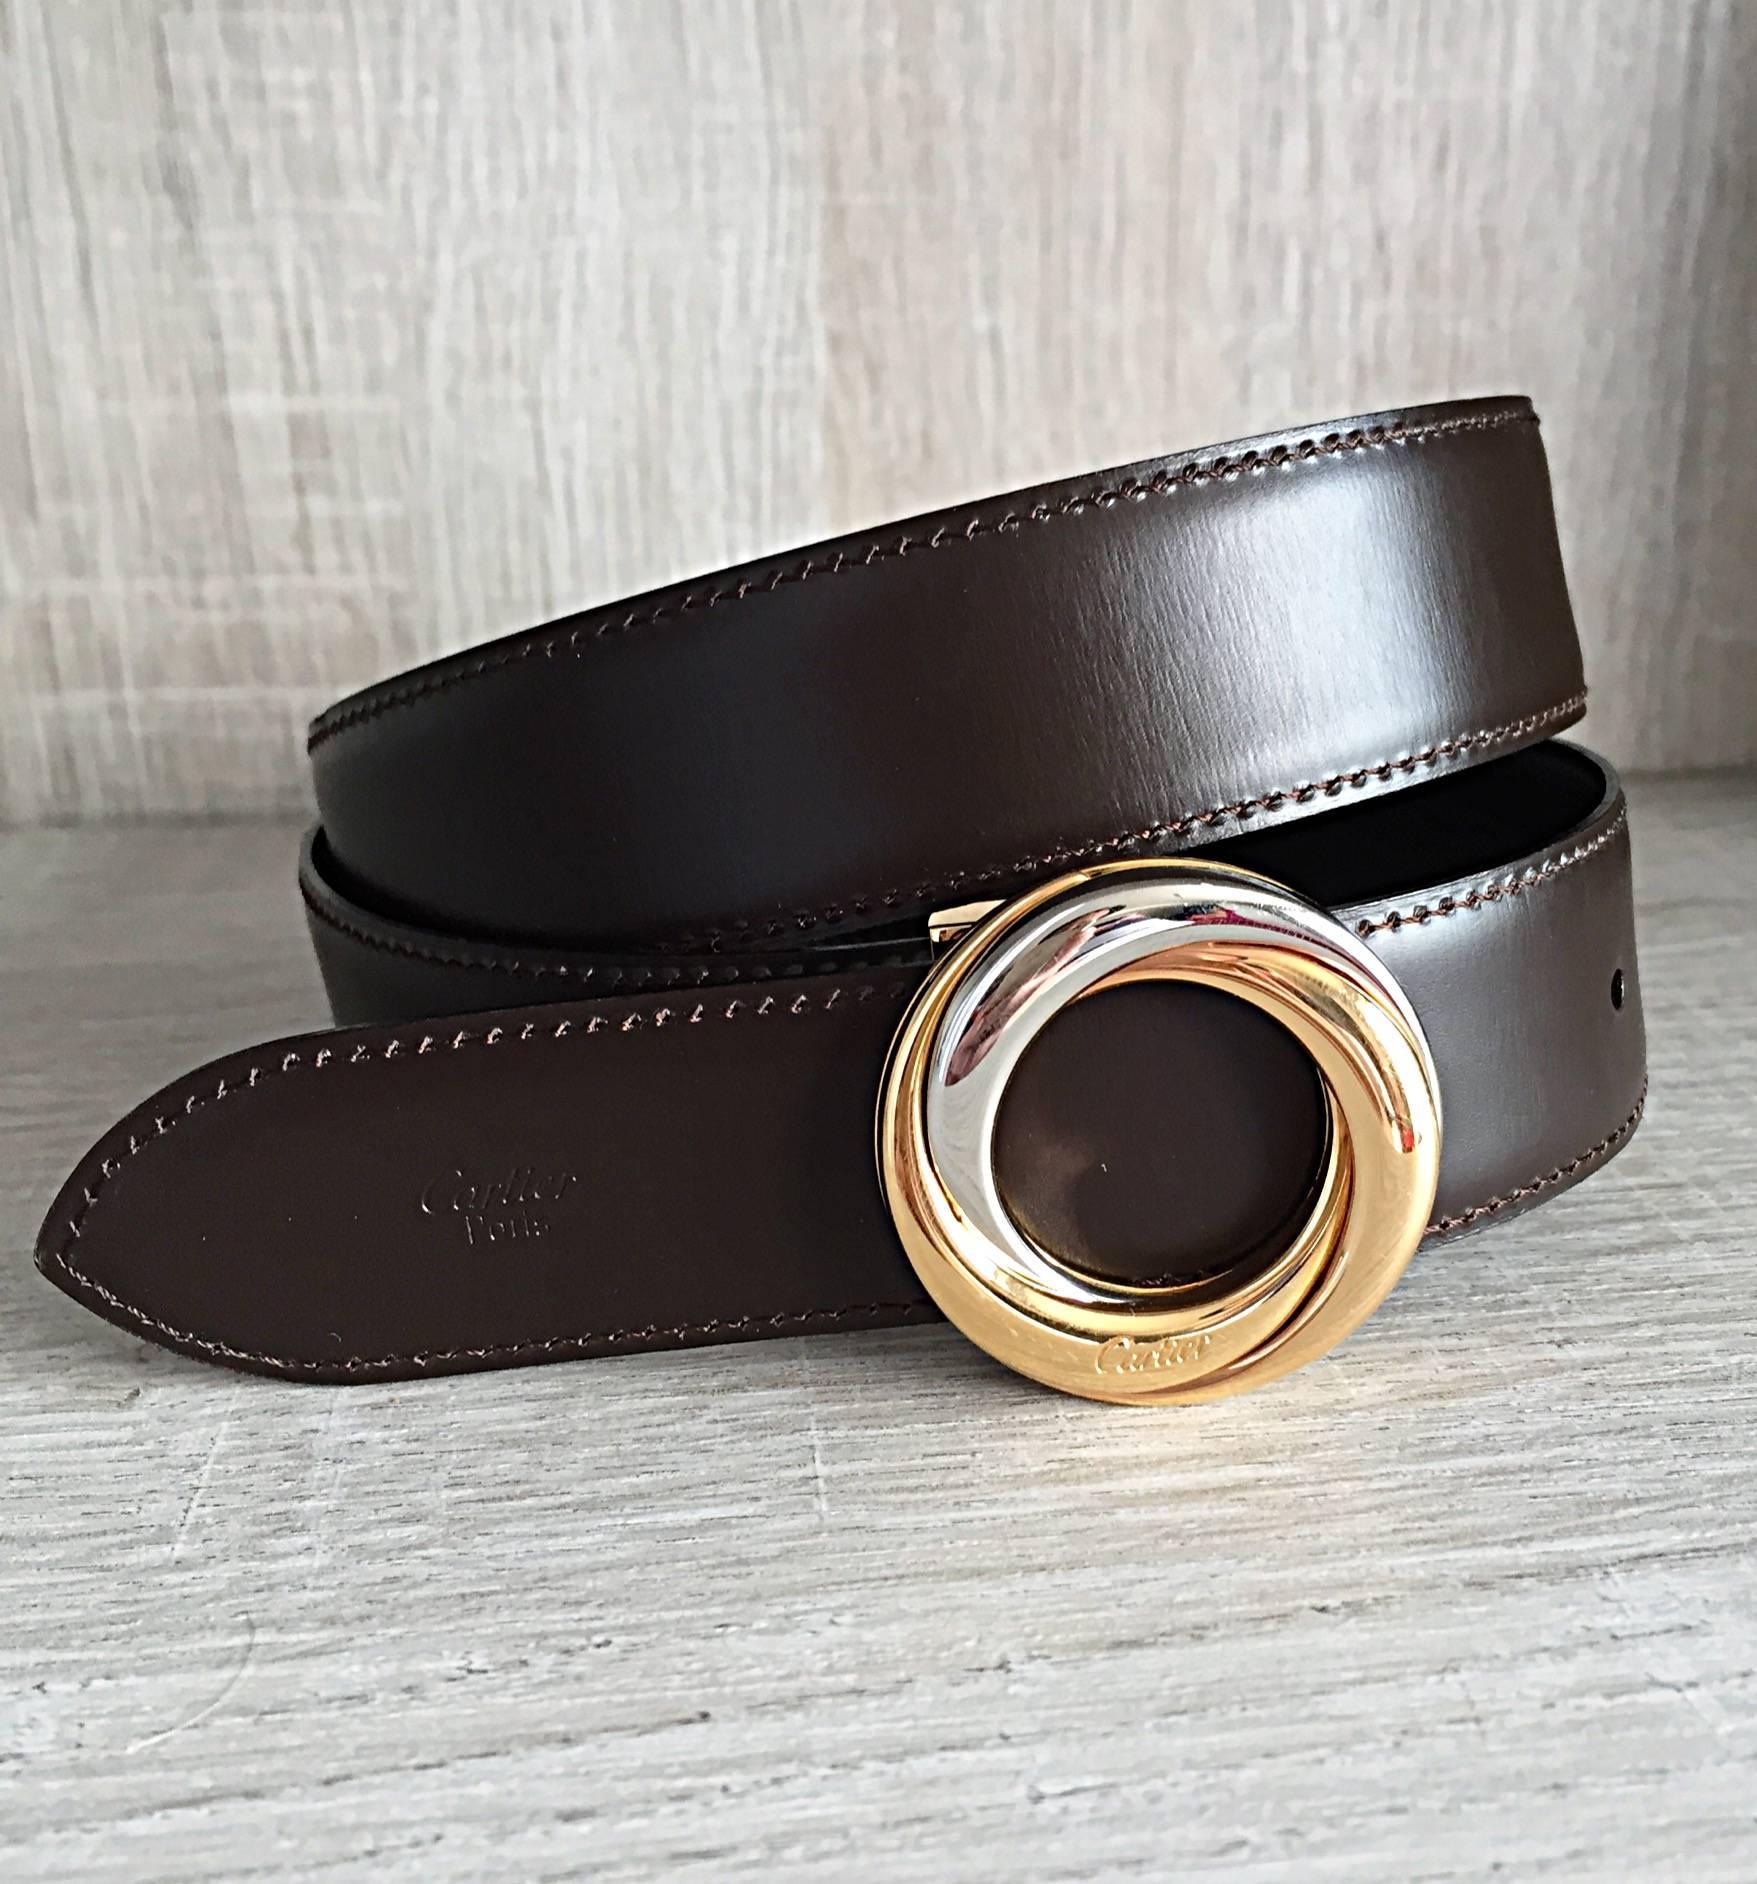 New Cartier Unisex Reversible Belt Brown + Black Two - Tone Gold & Silver Buckle 1